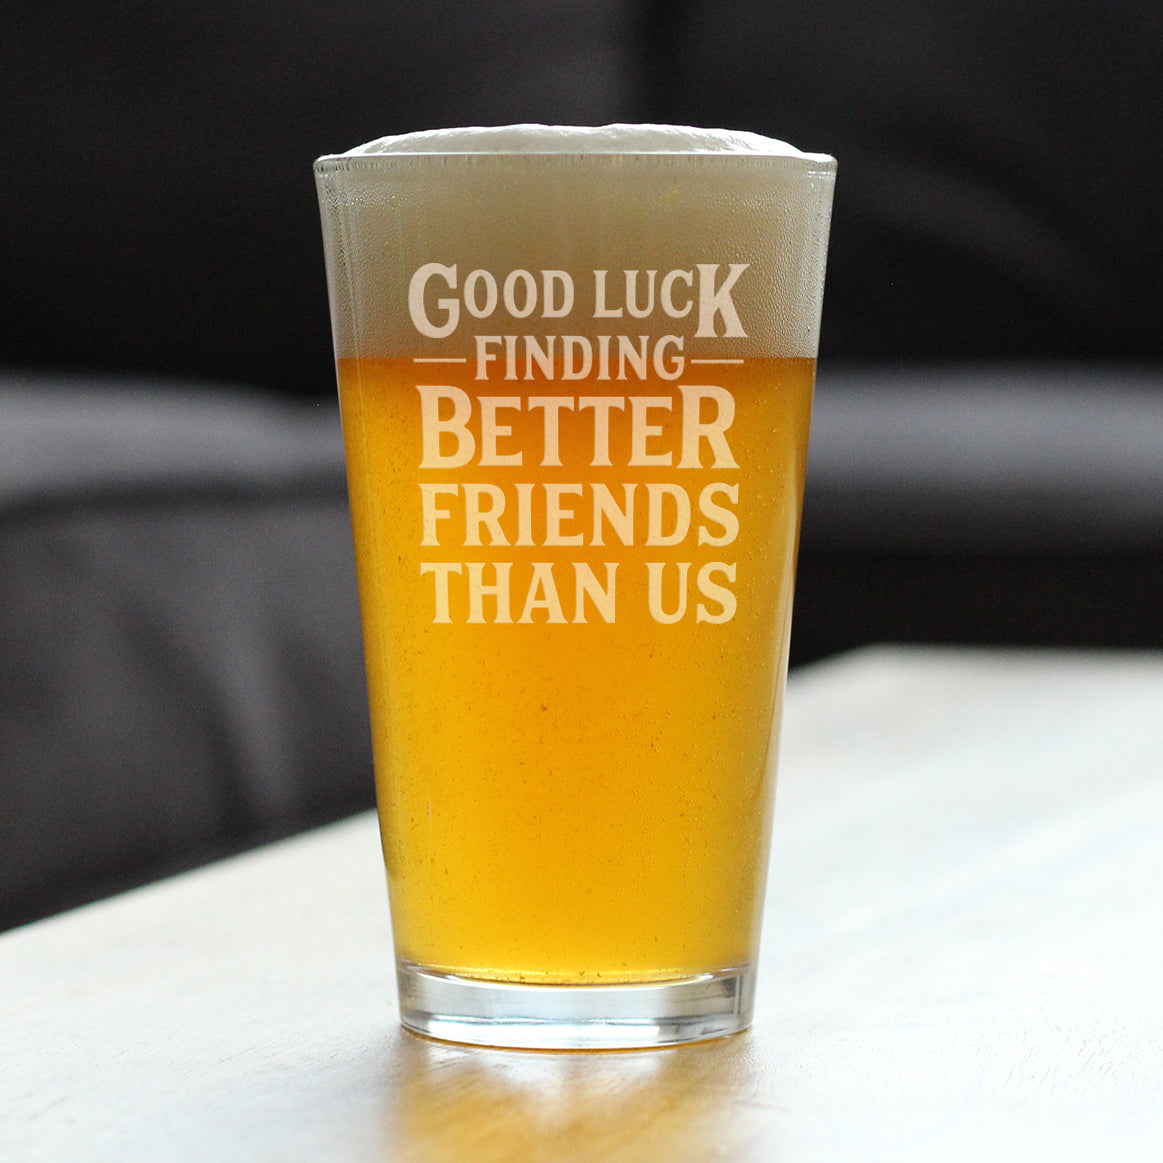 Good Luck Finding Better Friends Than Us - Pint Glass for Beer - Funny Farewell Gift For Best Friend Moving Away - 16 oz Glasses